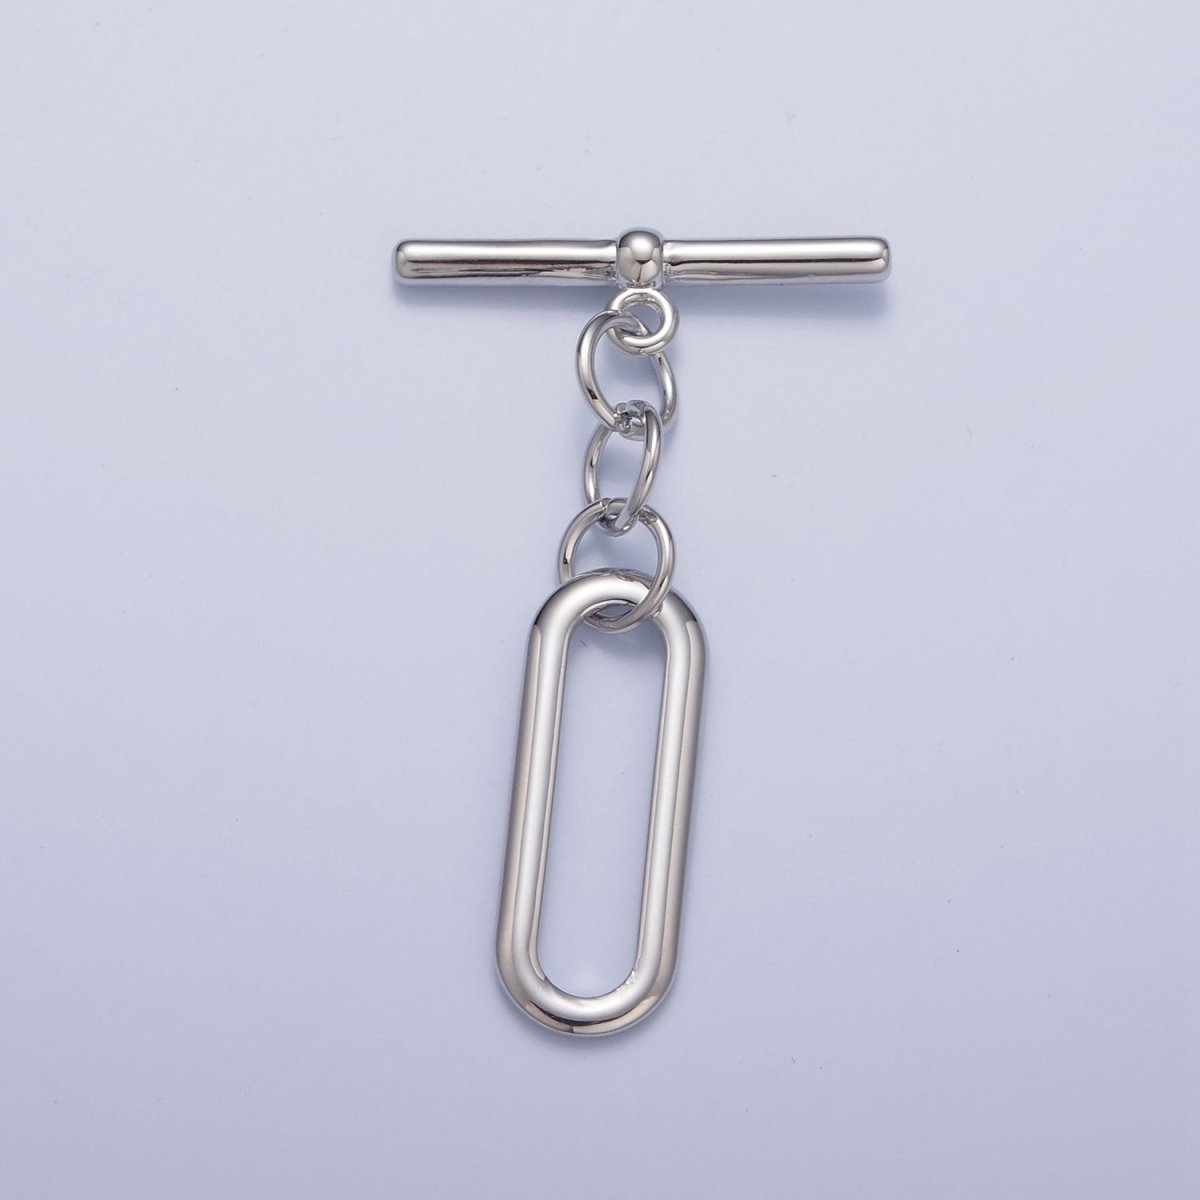 Gold Filled Rectangular Oval Toggle Clasps Closure in Gold & Silver L-753~L-755 - DLUXCA